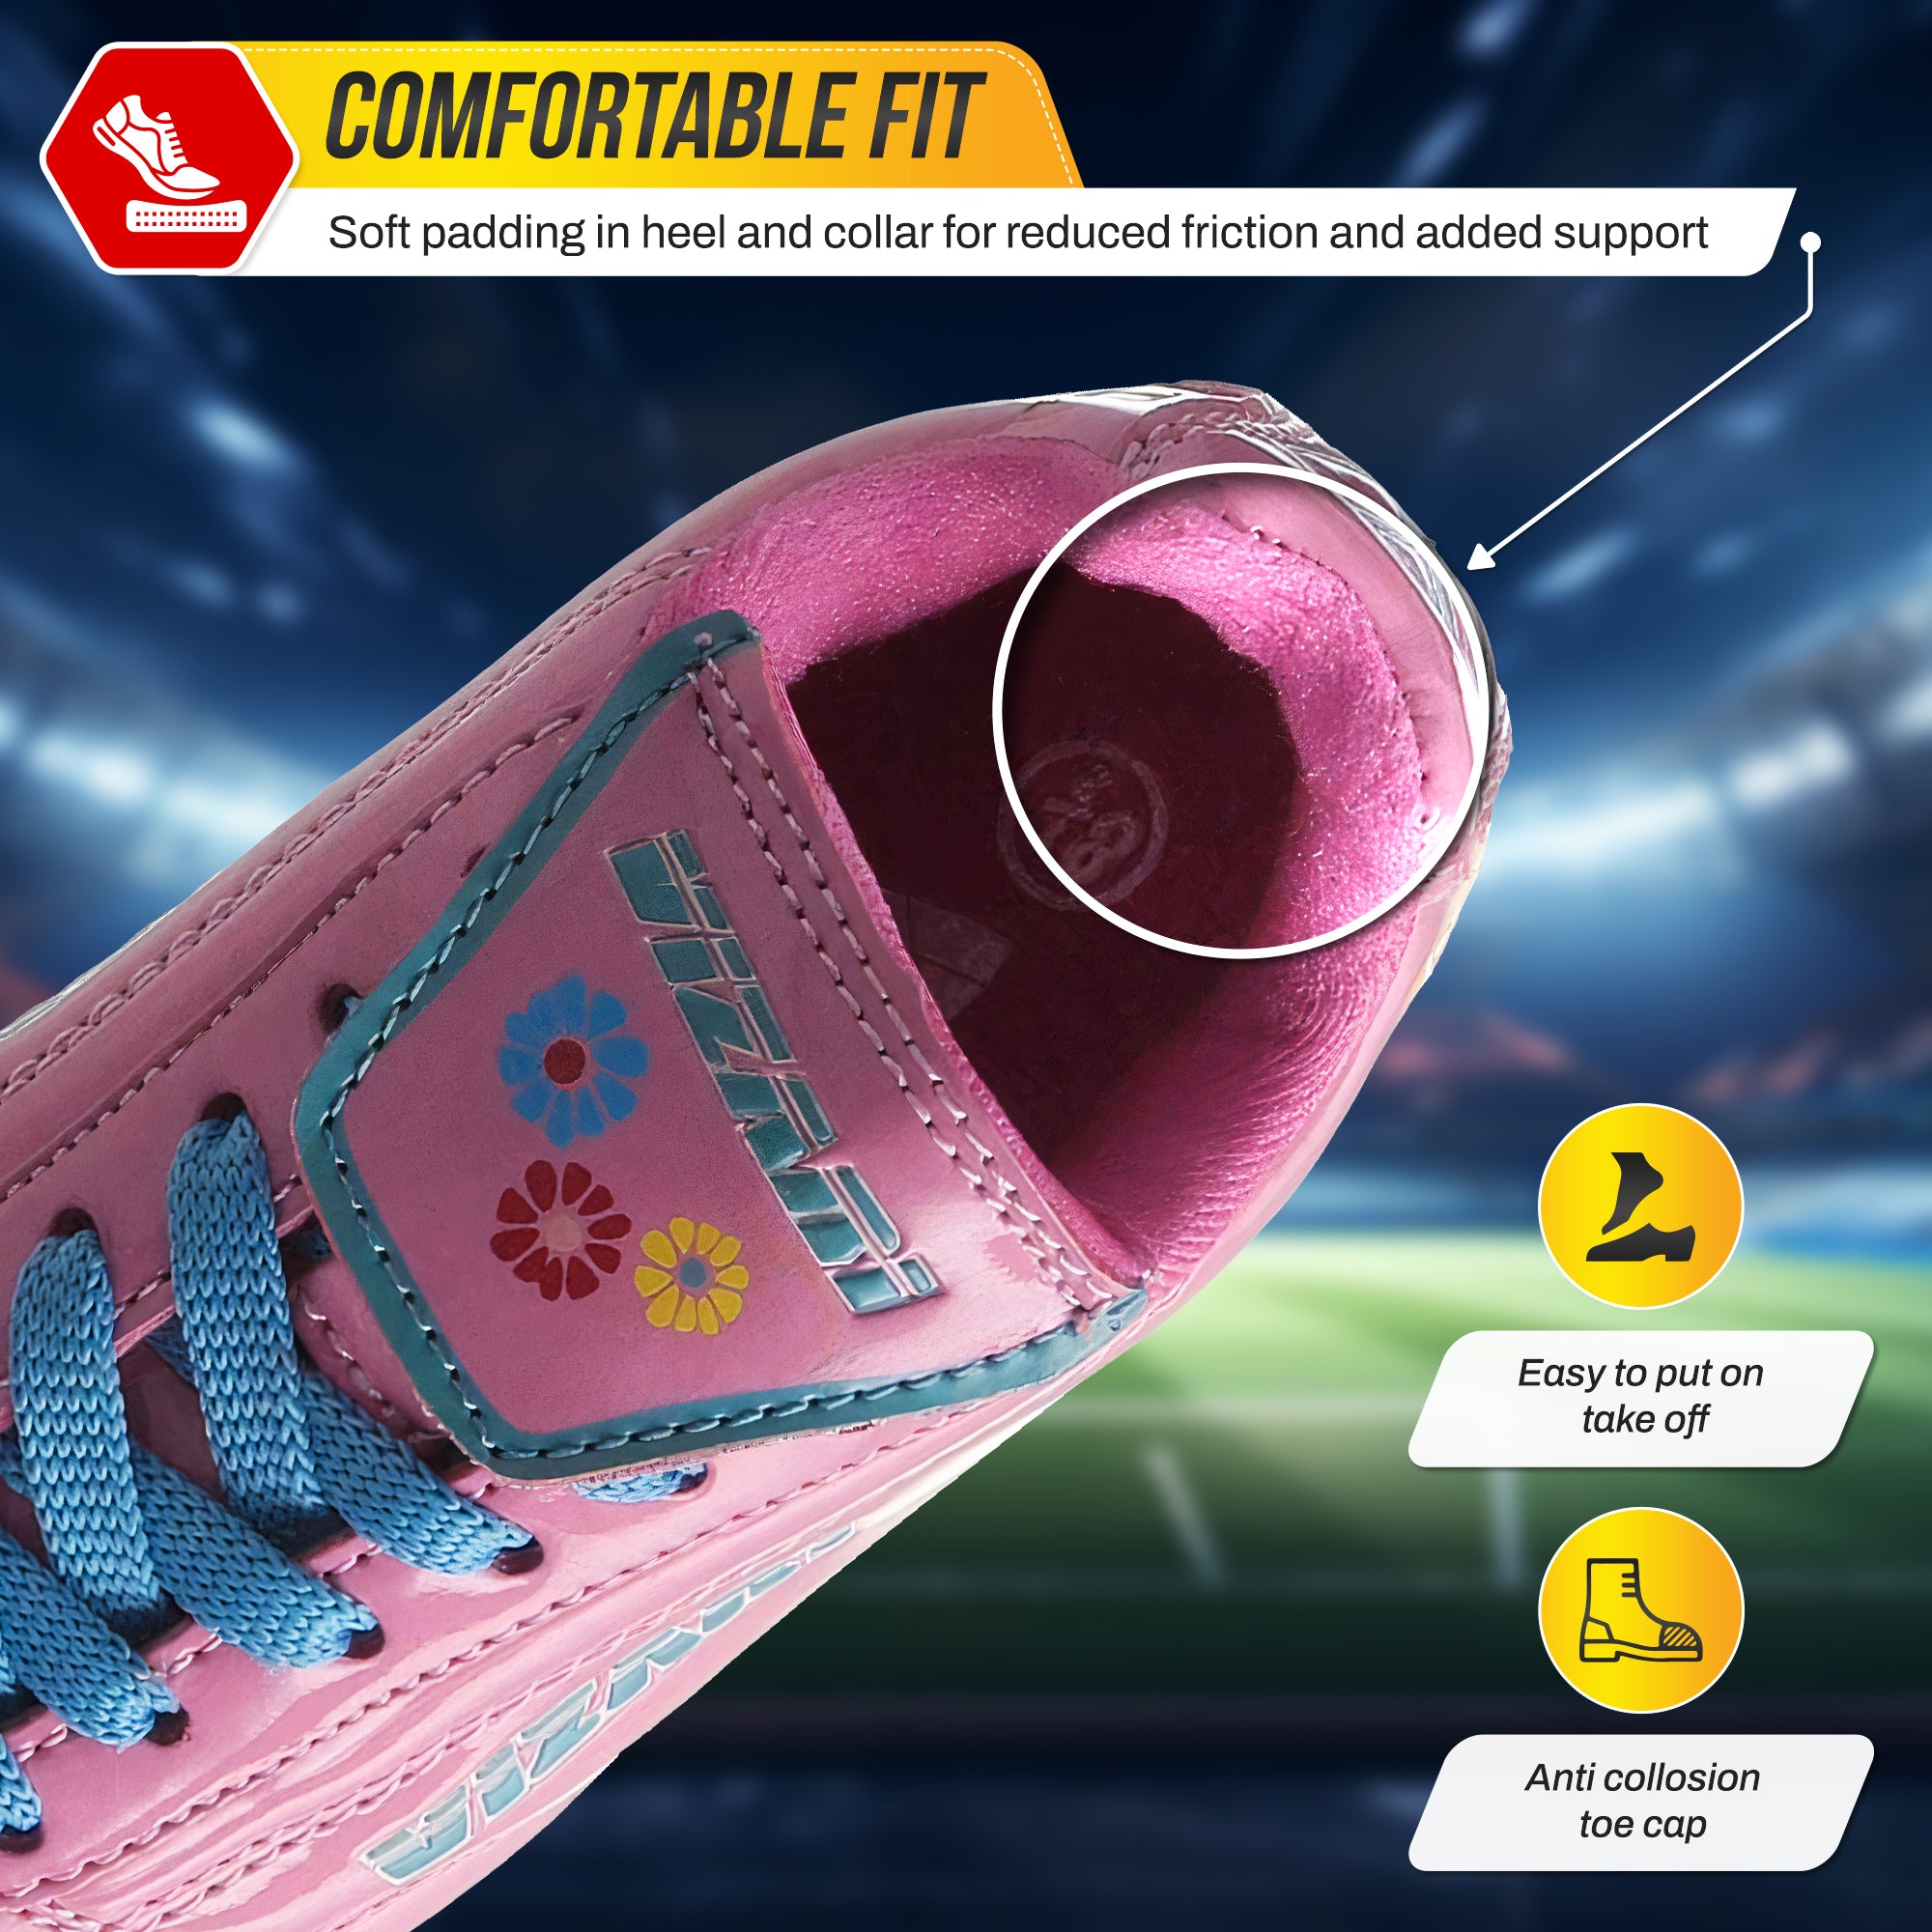 Blossom Firm Ground Soccer Shoes-Pink/Blue